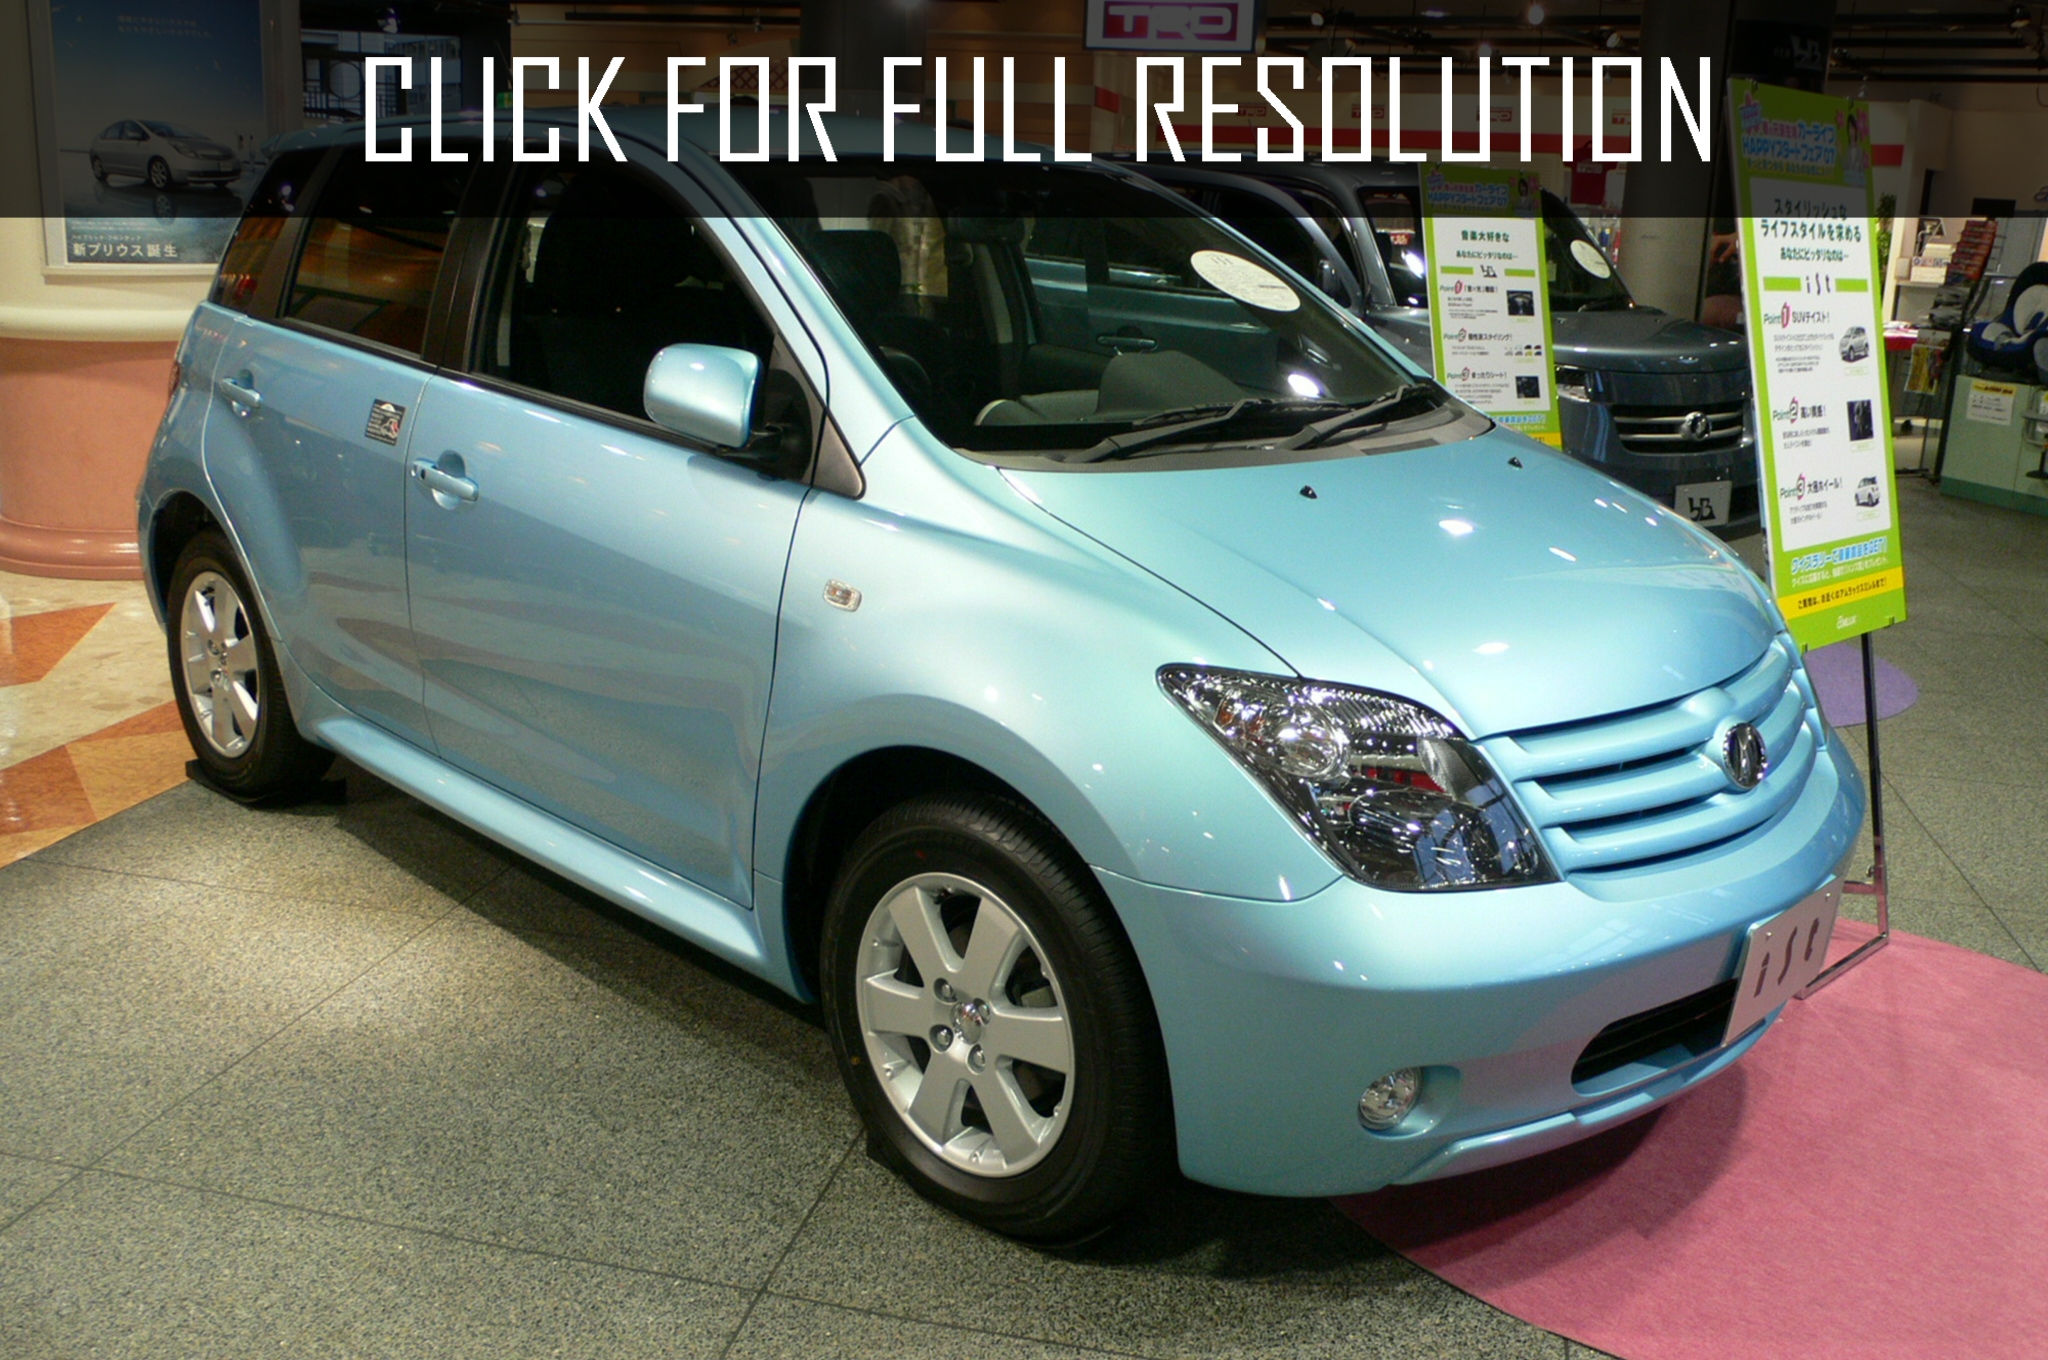 Toyota Ist 2014 Reviews Prices Ratings With Various Photos